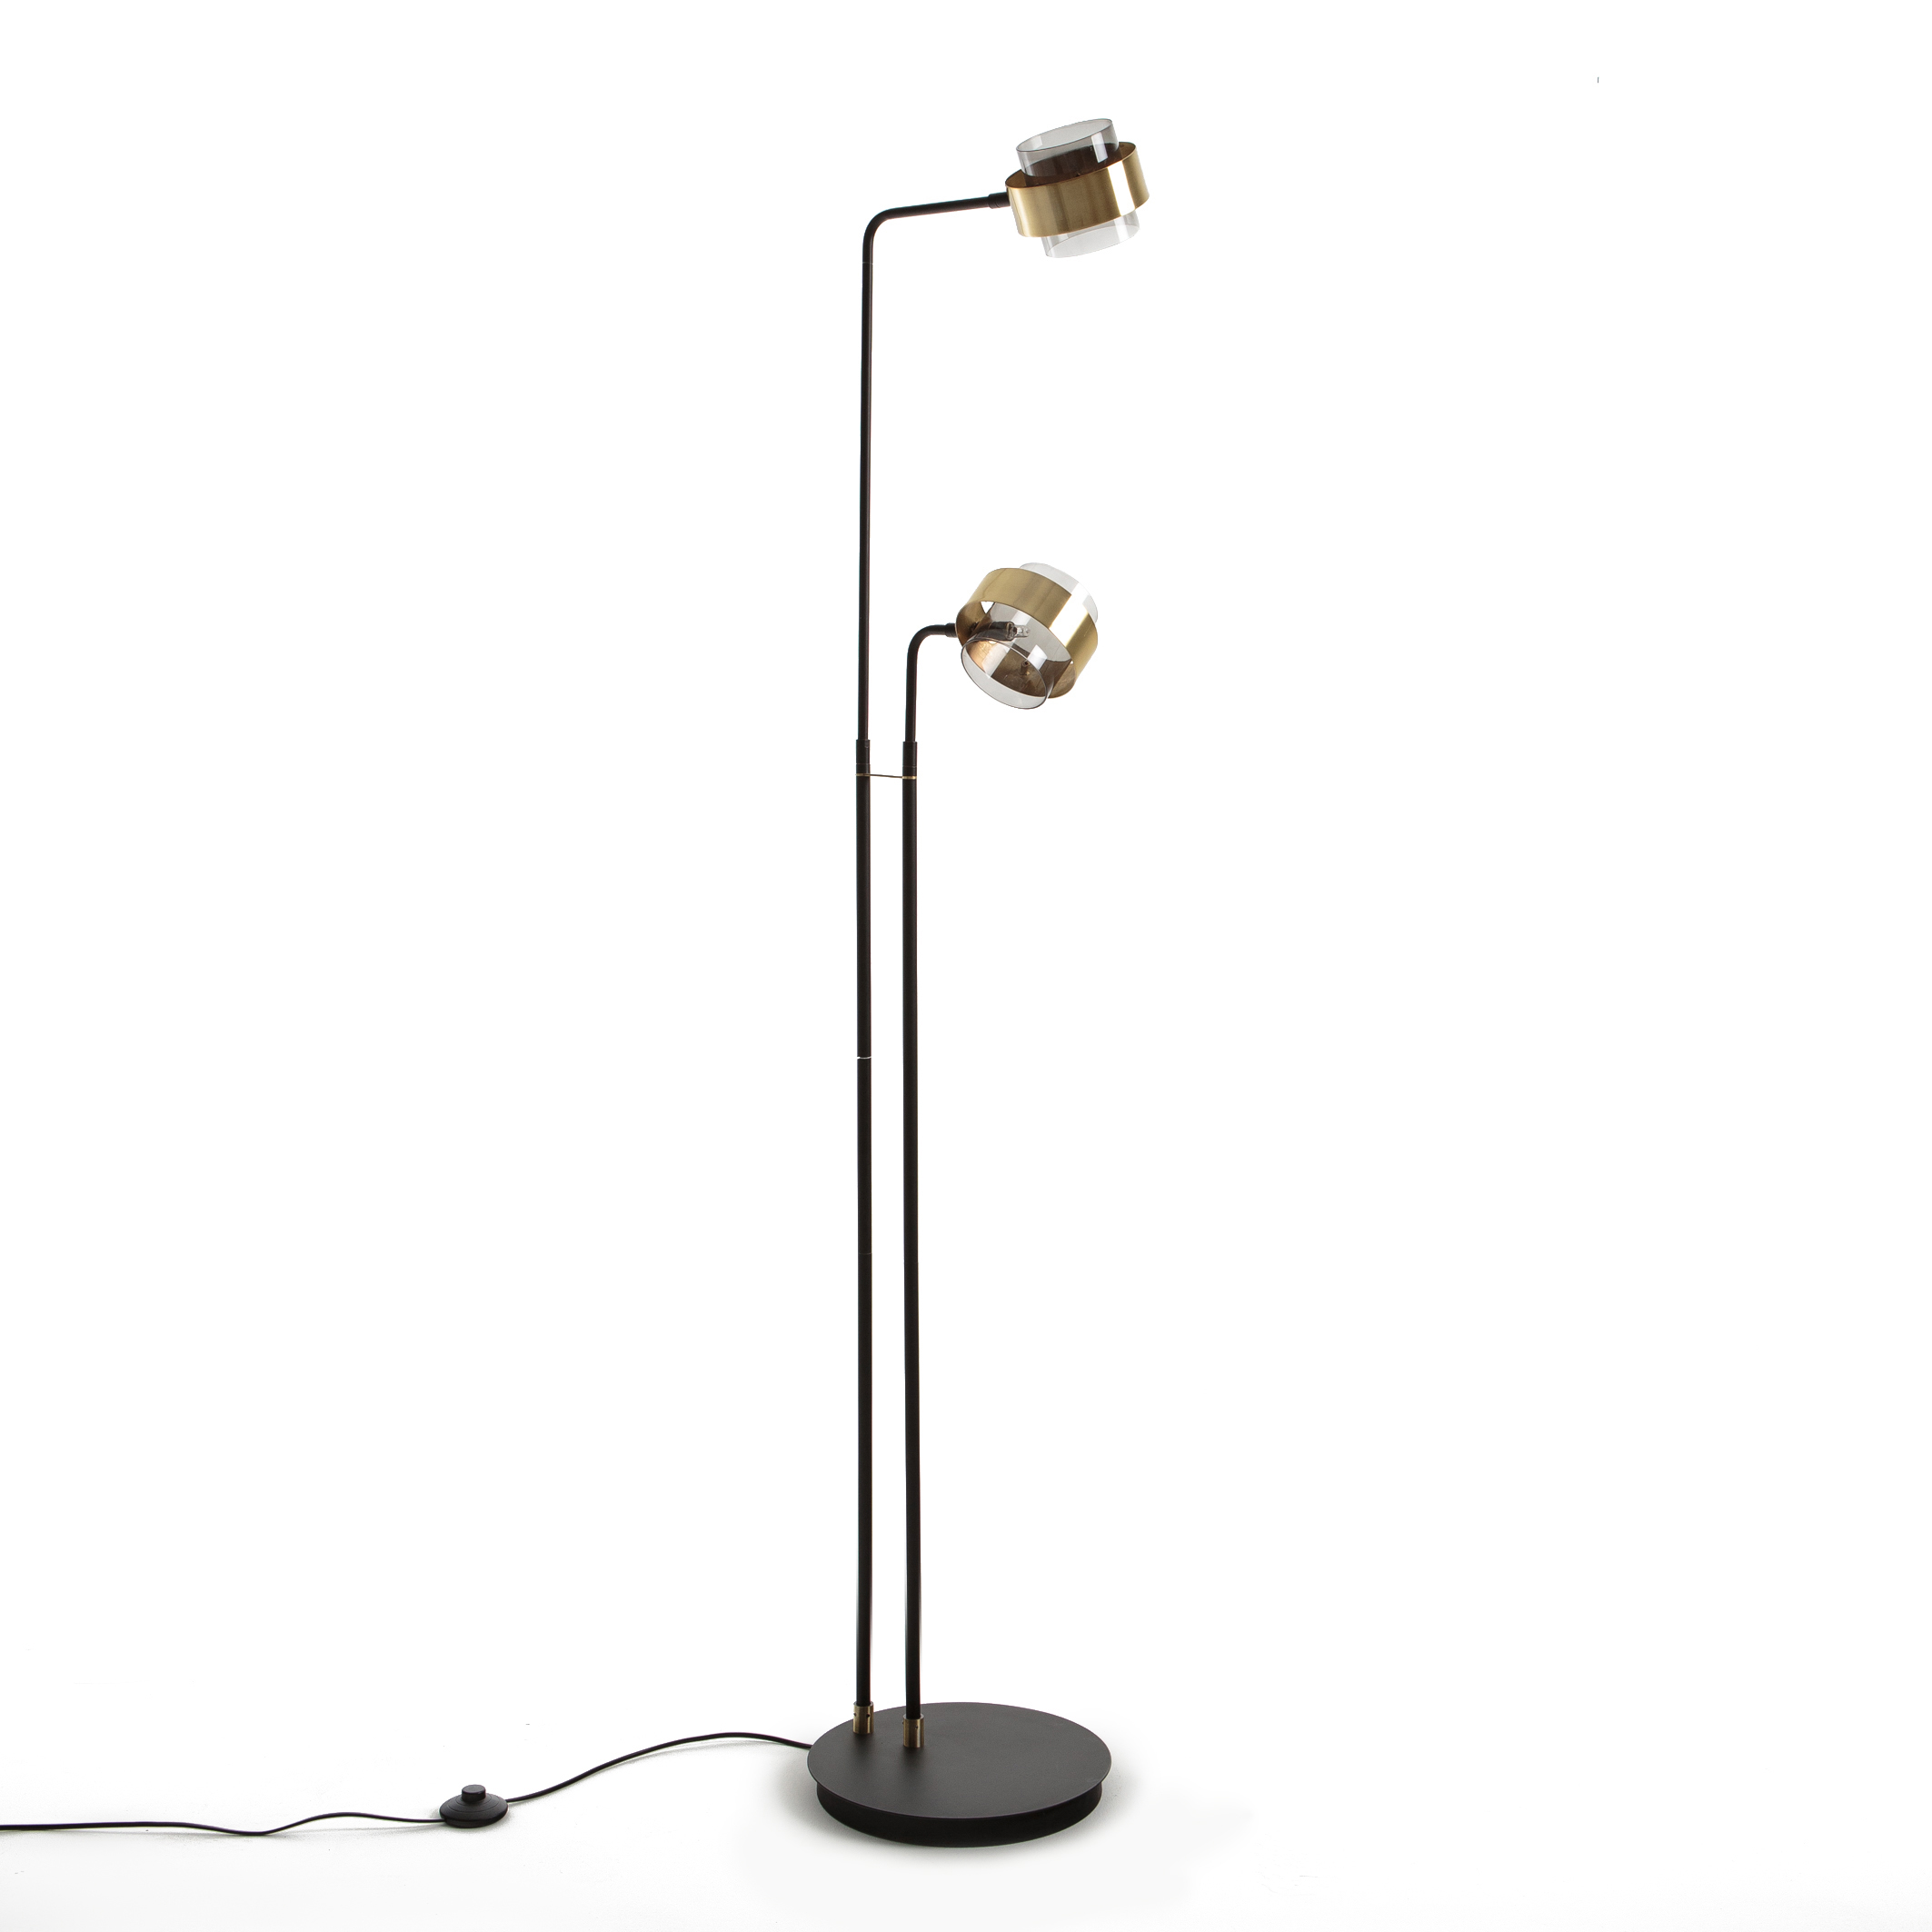 Botello metal & glass Redoute floor lamp black/brass La reading | with arms La Redoute adjustable Interieurs